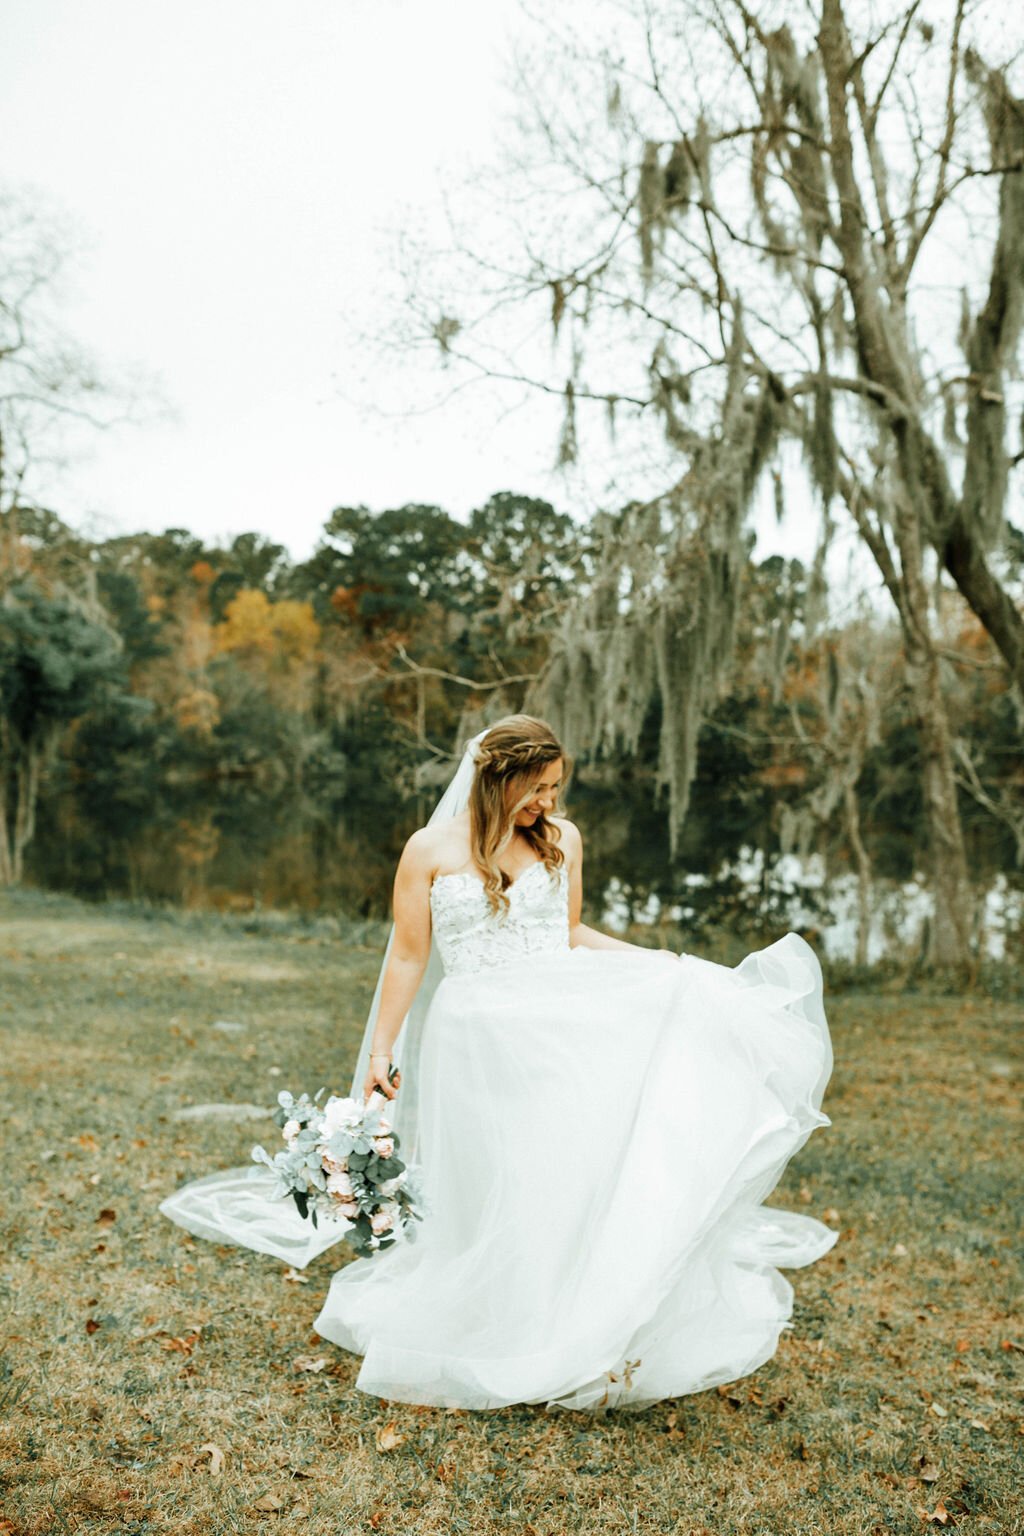 ivory-and-beau-dresses-savannah-bridal-boutique-savannah-bridal-shop-wedding-dresses-bride-bridal-shopping-bridal-shop-engaged-wedding-boutique-down-for-the-gown-baylee-blush-by-hayley-paige--wedding-dress-i-and-b-bride-IMG_0717.jpg